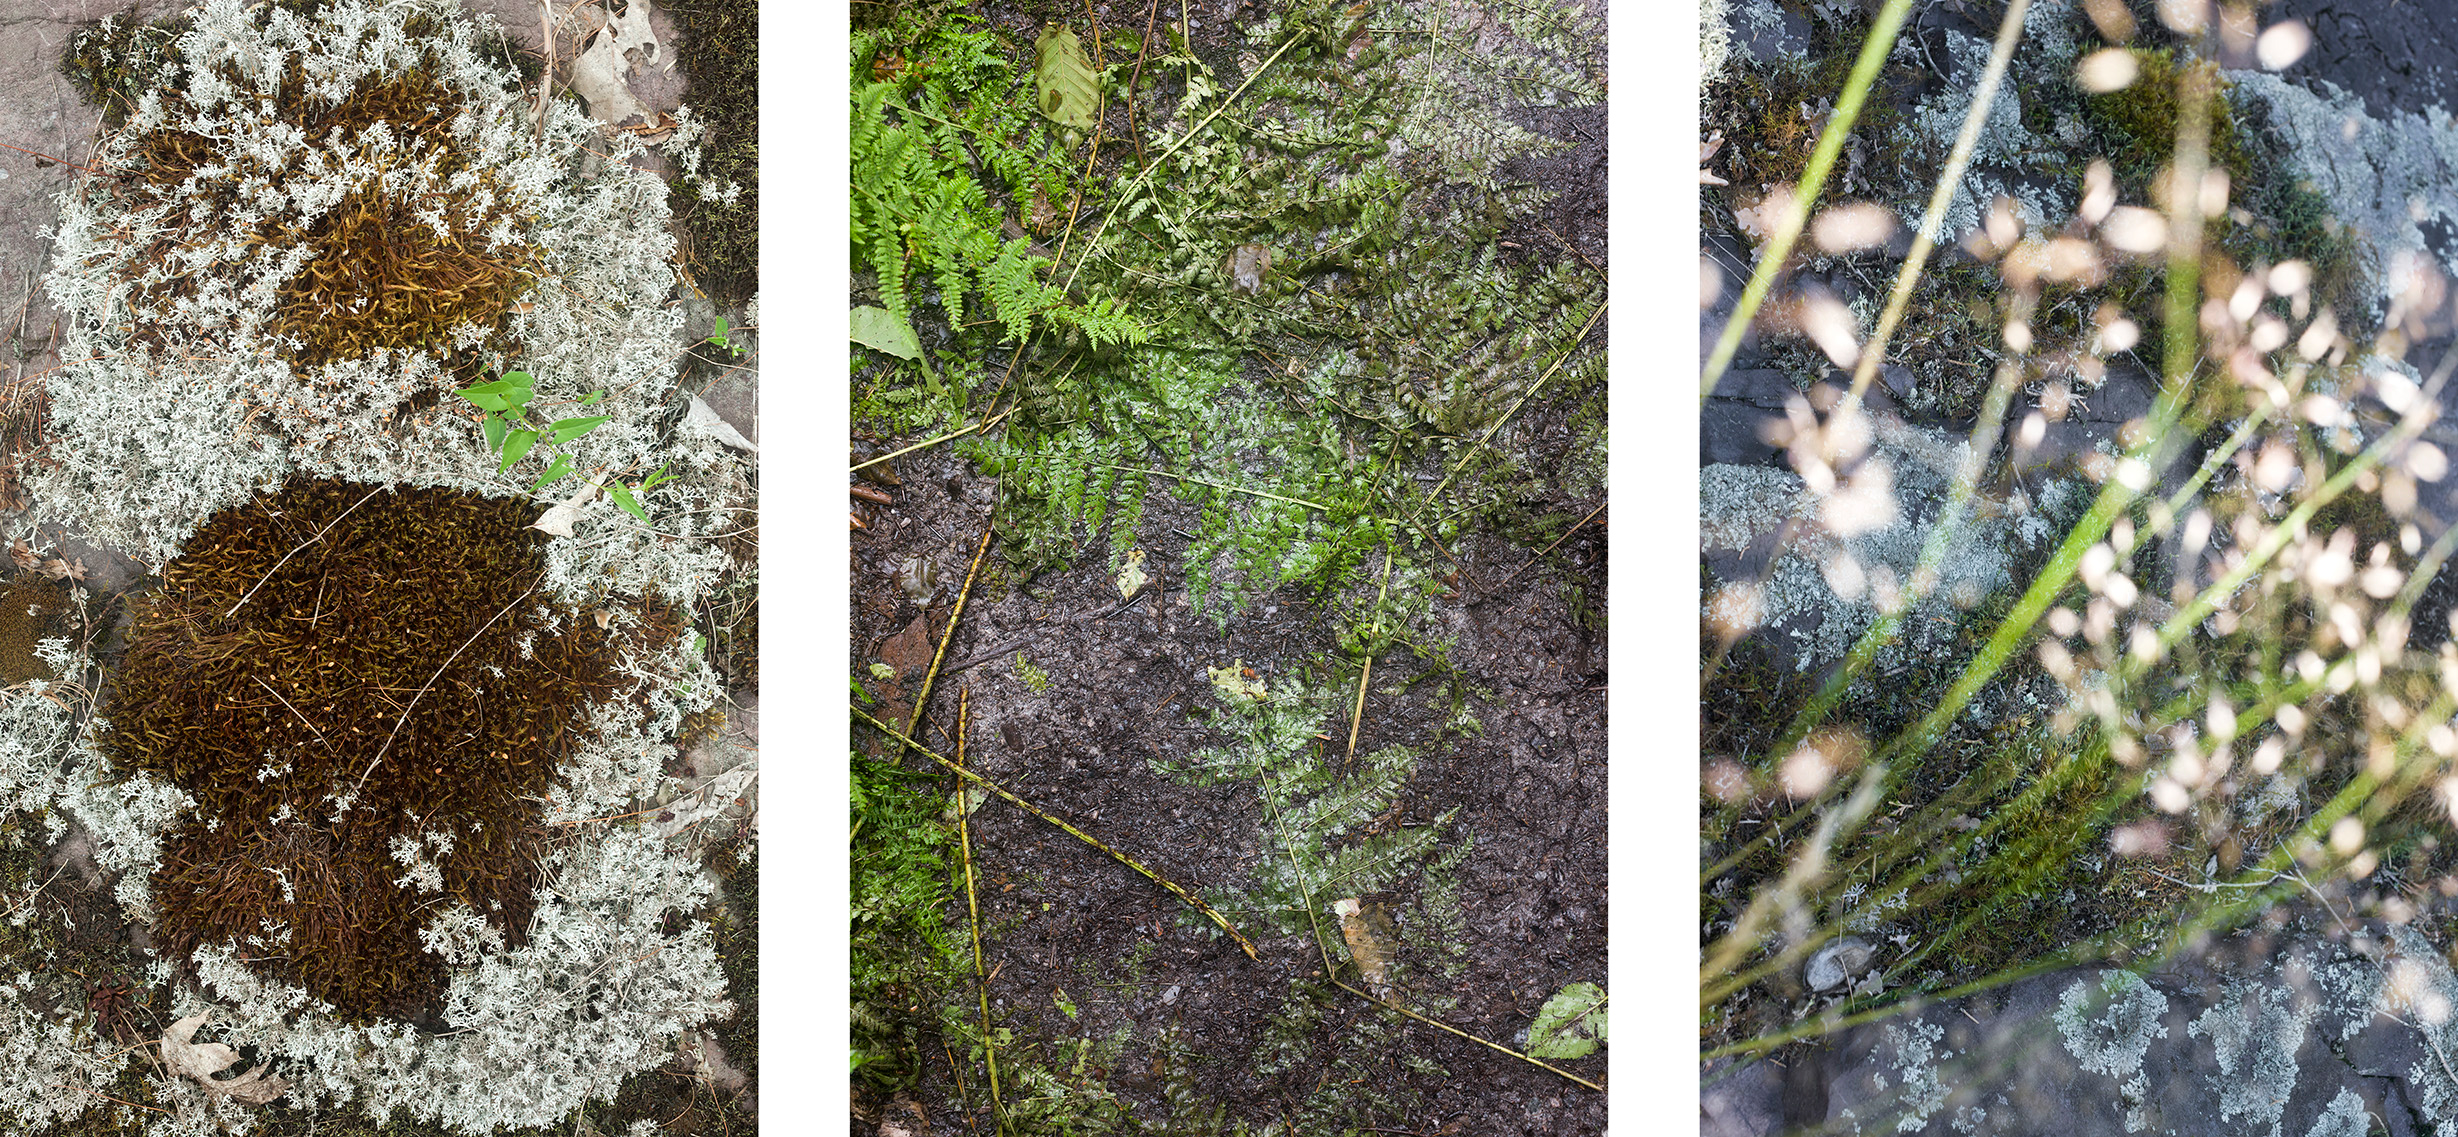 Triptych looking down on the forest floor.